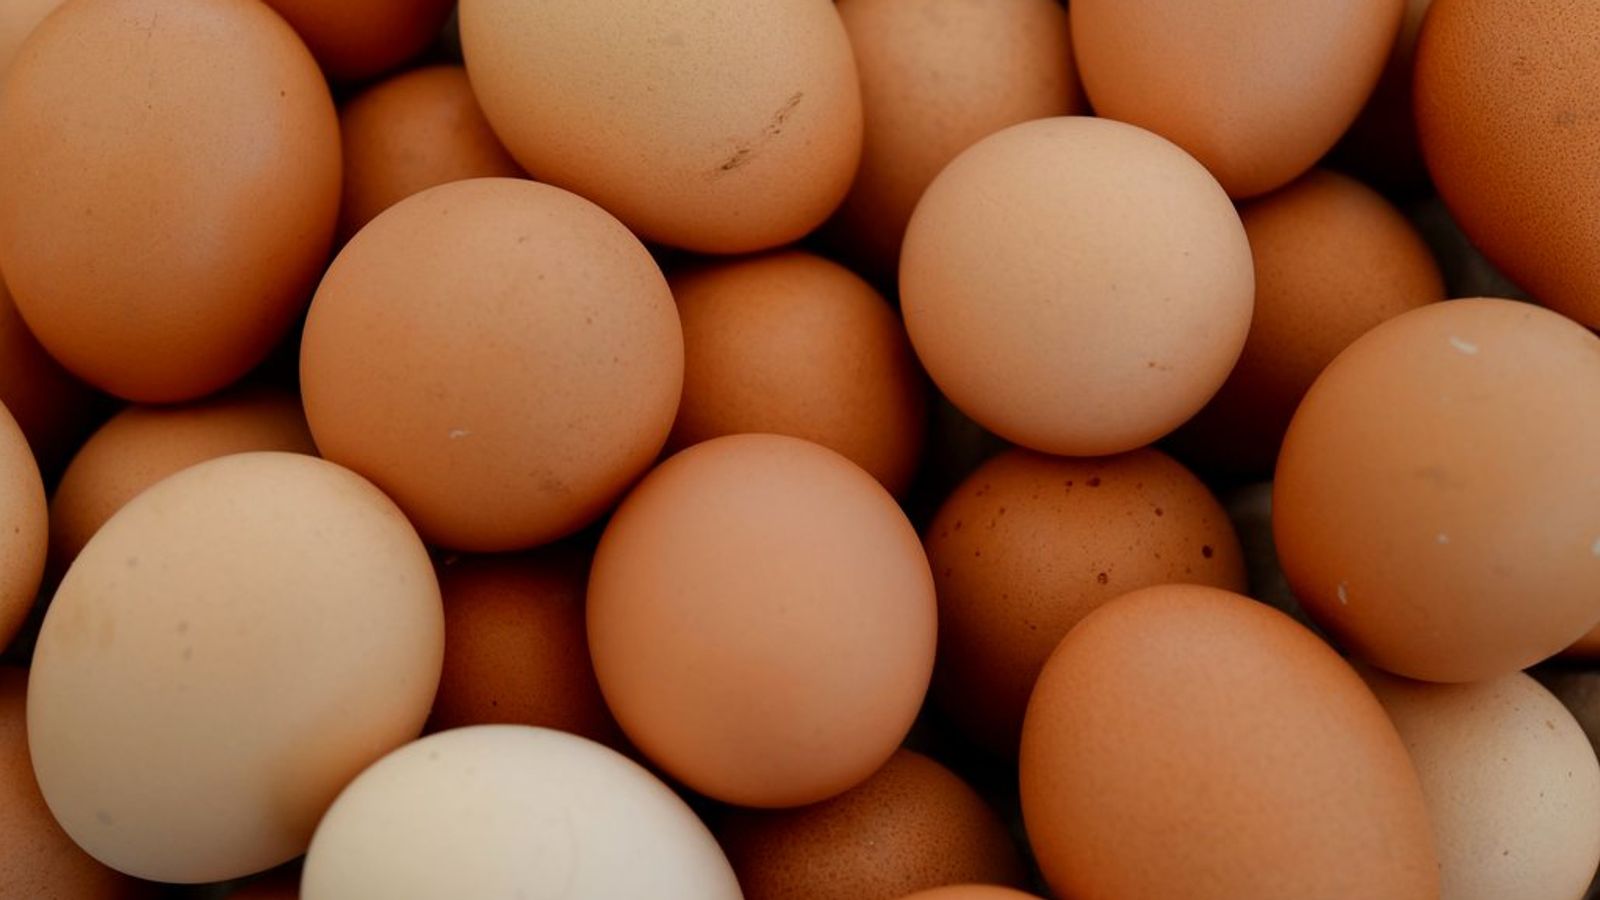 Egg shortages 'could just be the start' as UK is 'sleepwalking' into food supply crisis, farmers union warns